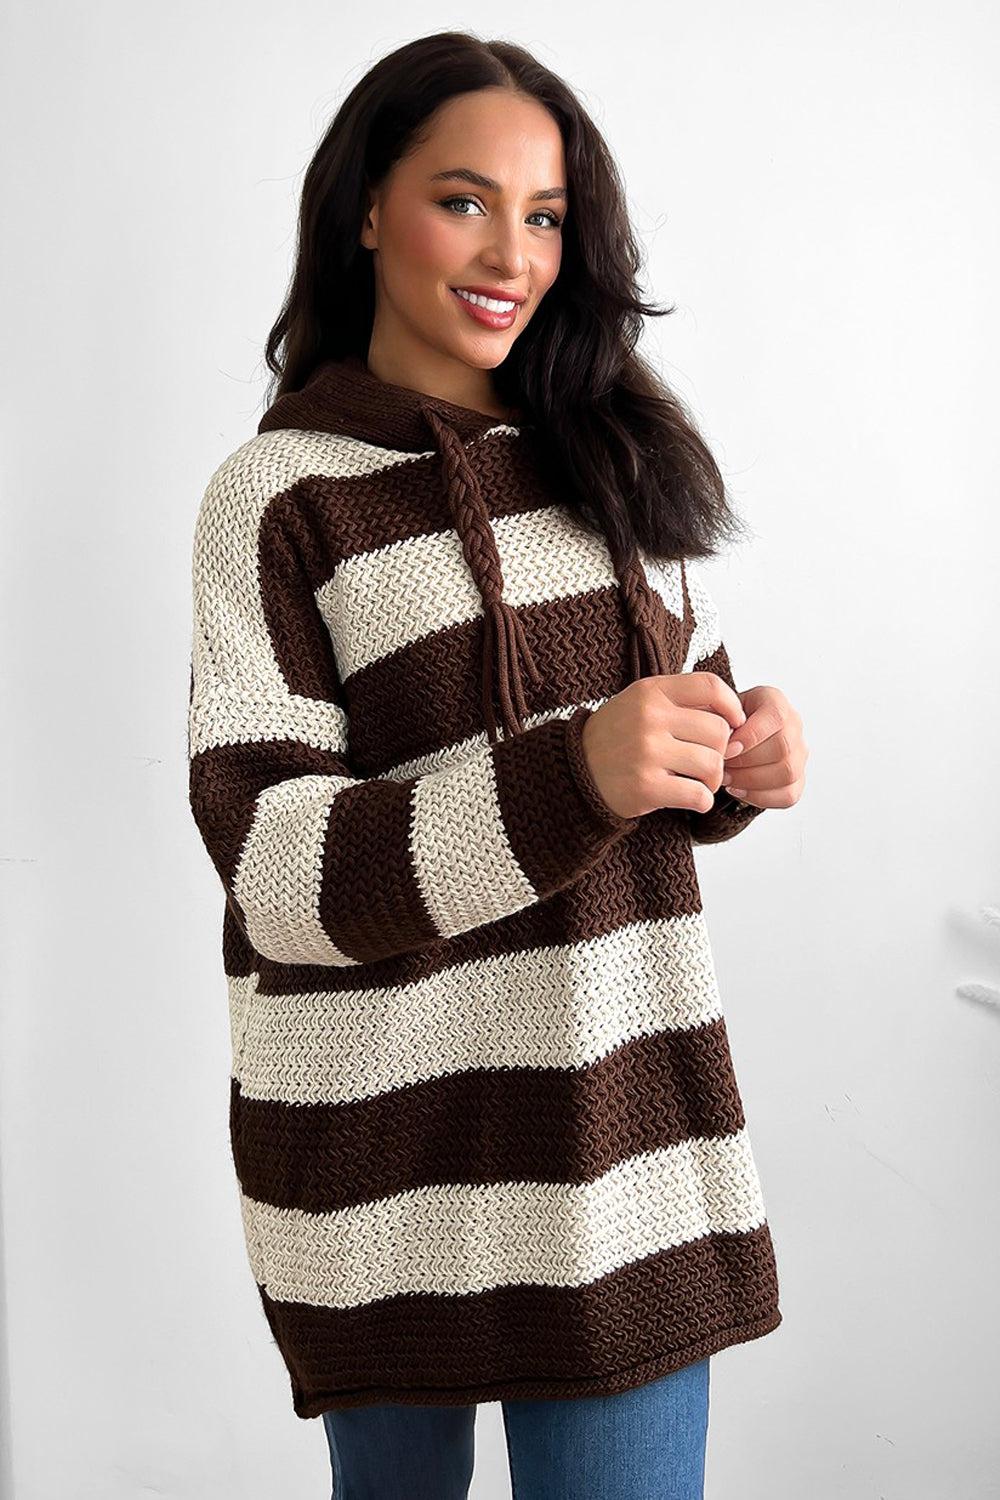 Large Stripes Pattern Hooded Pullover-SinglePrice